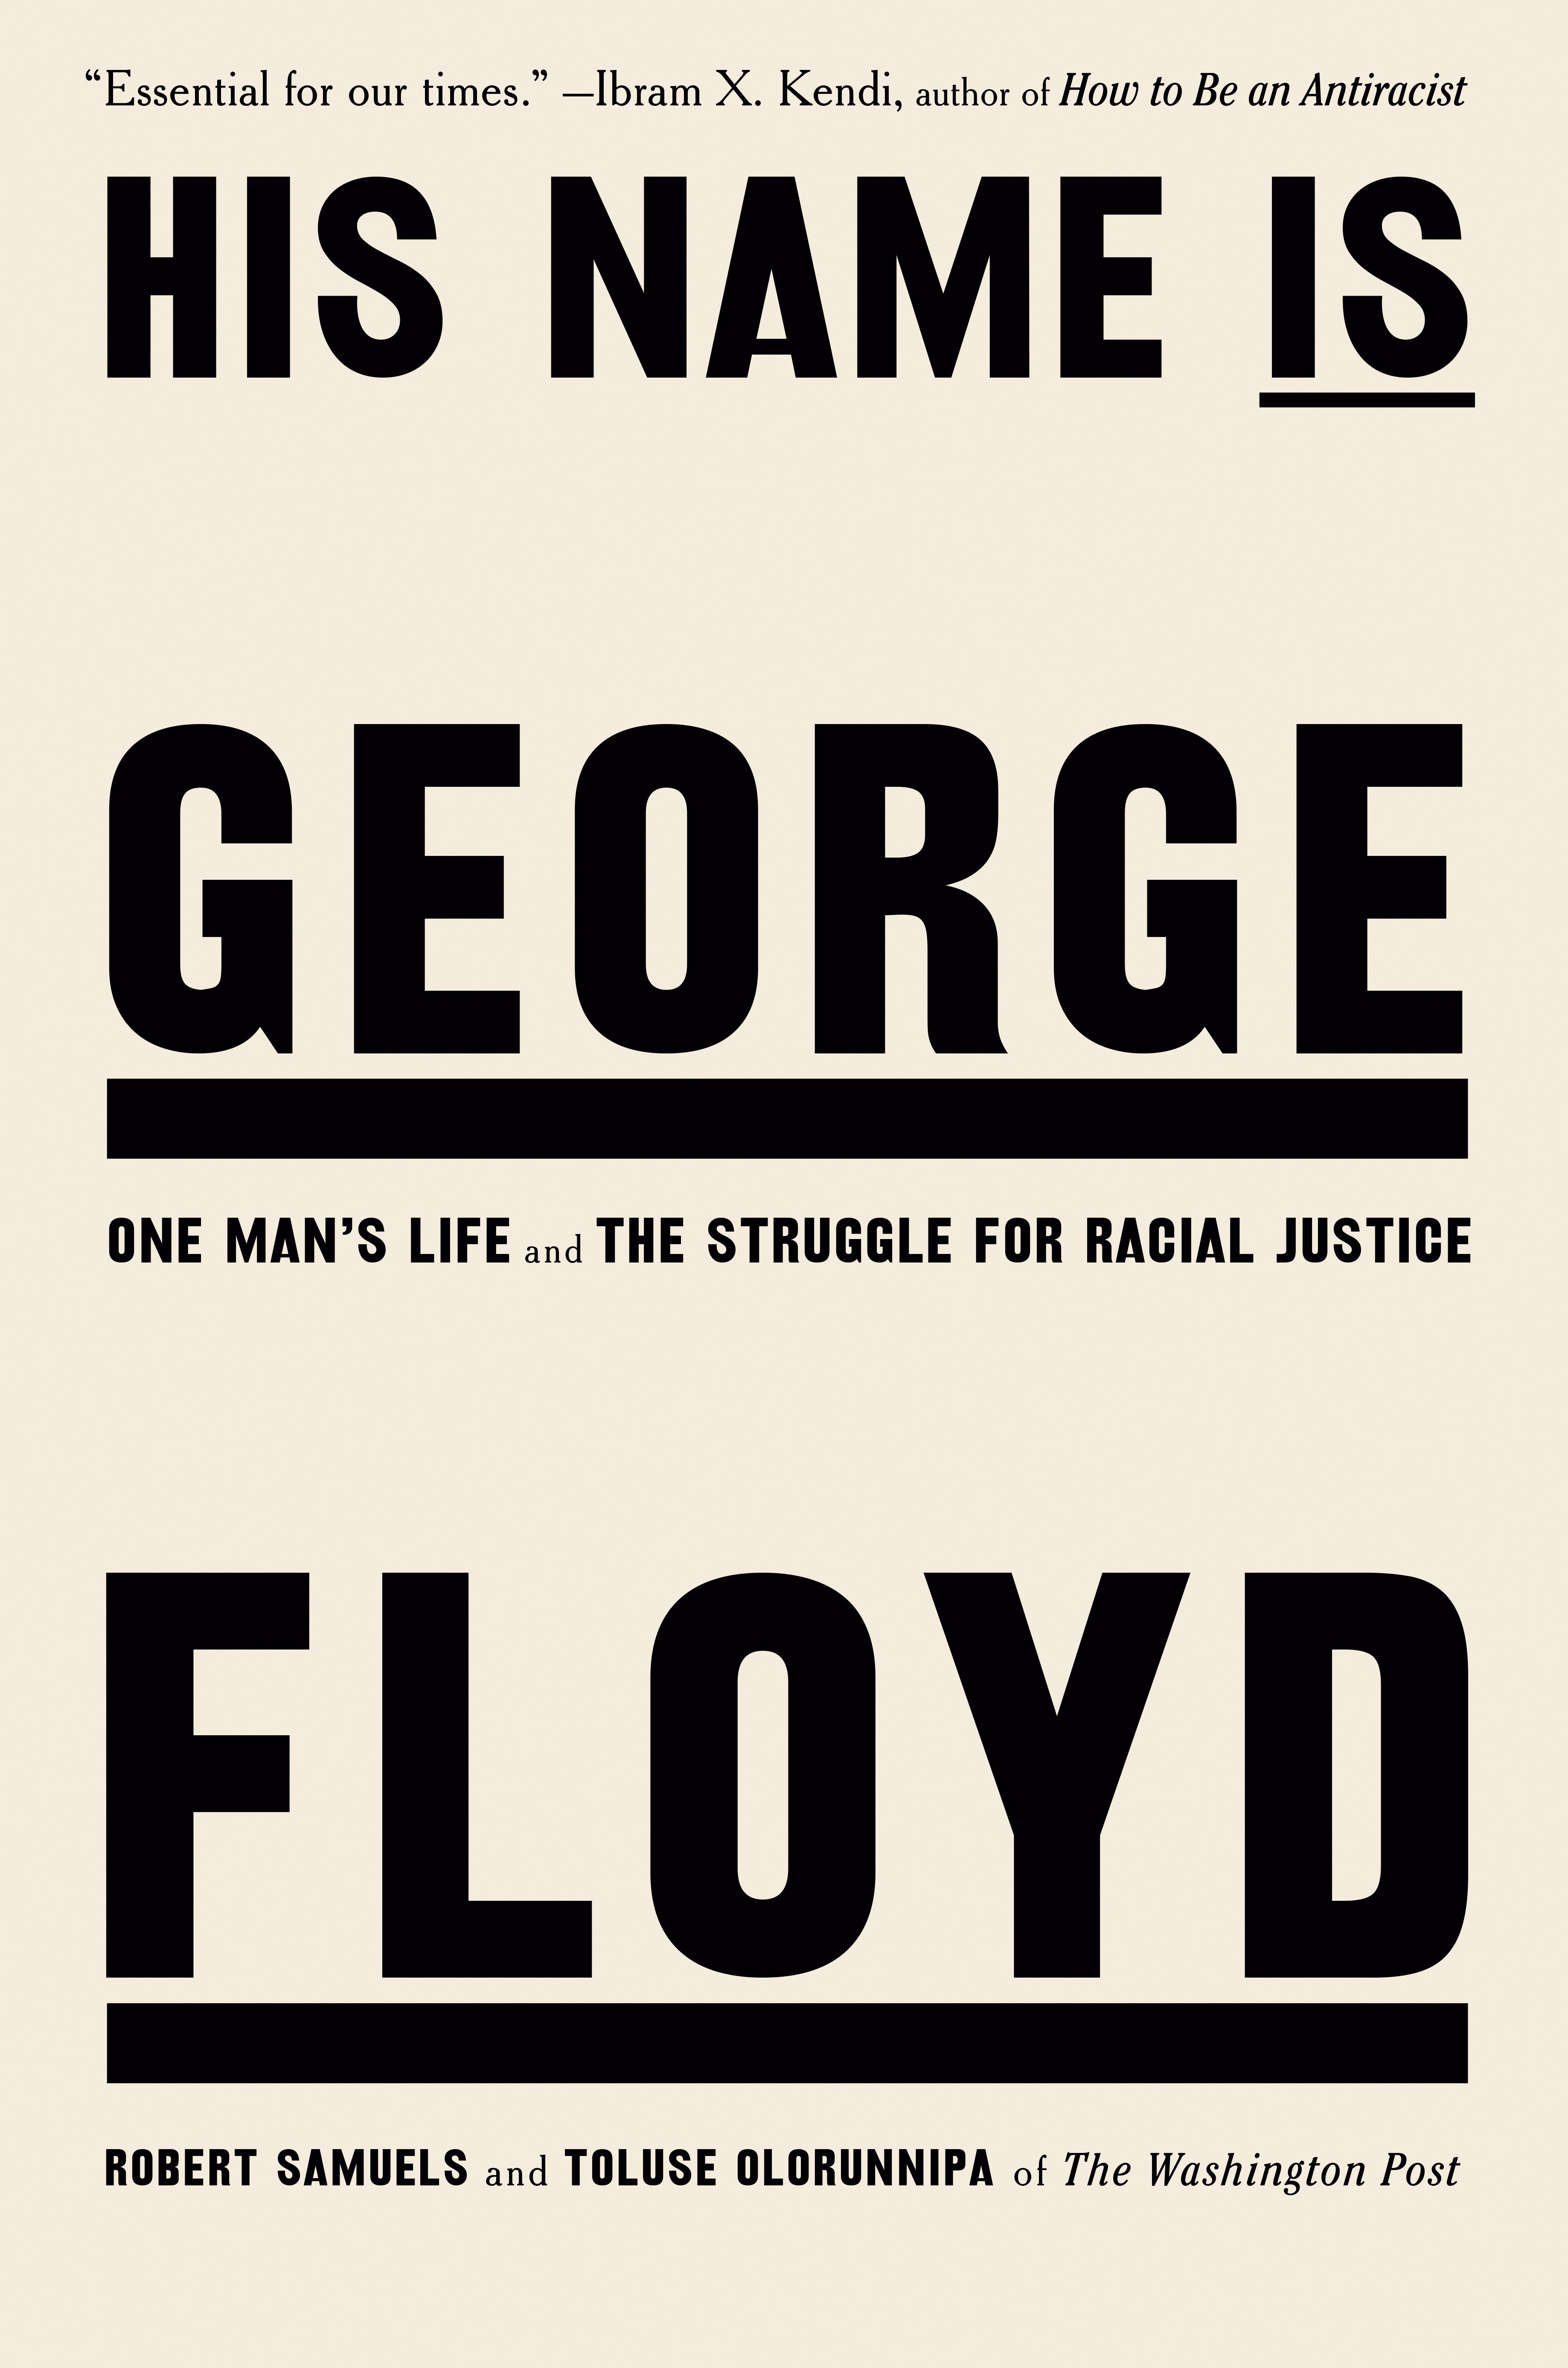 NDG Book Review: ‘His Name Is George Floyd’ provides answers